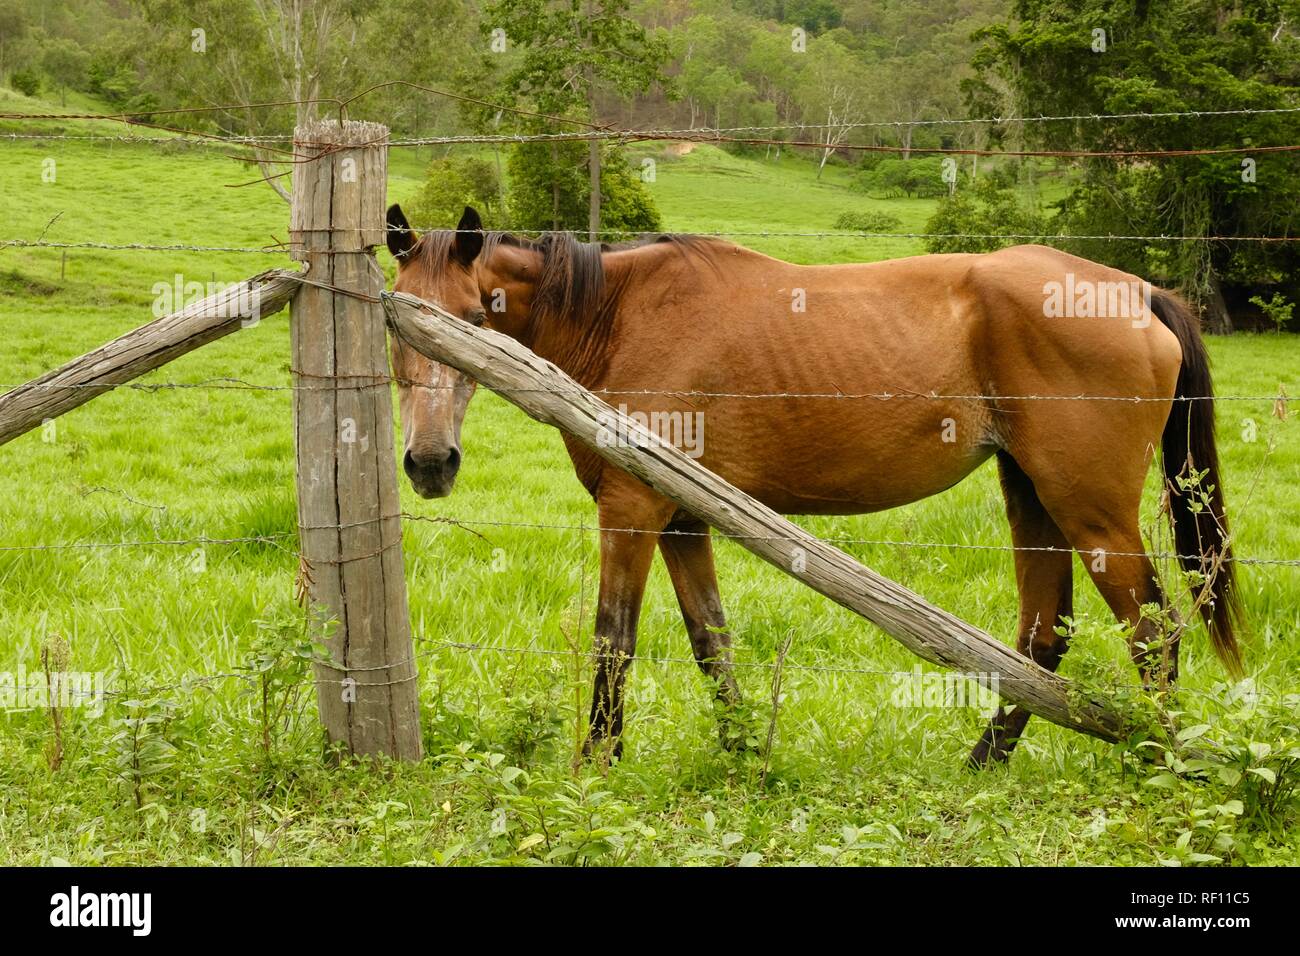 A horse behind a fence with its face hidden, Mia Mia State Forest, Queensland, Australia Stock Photo